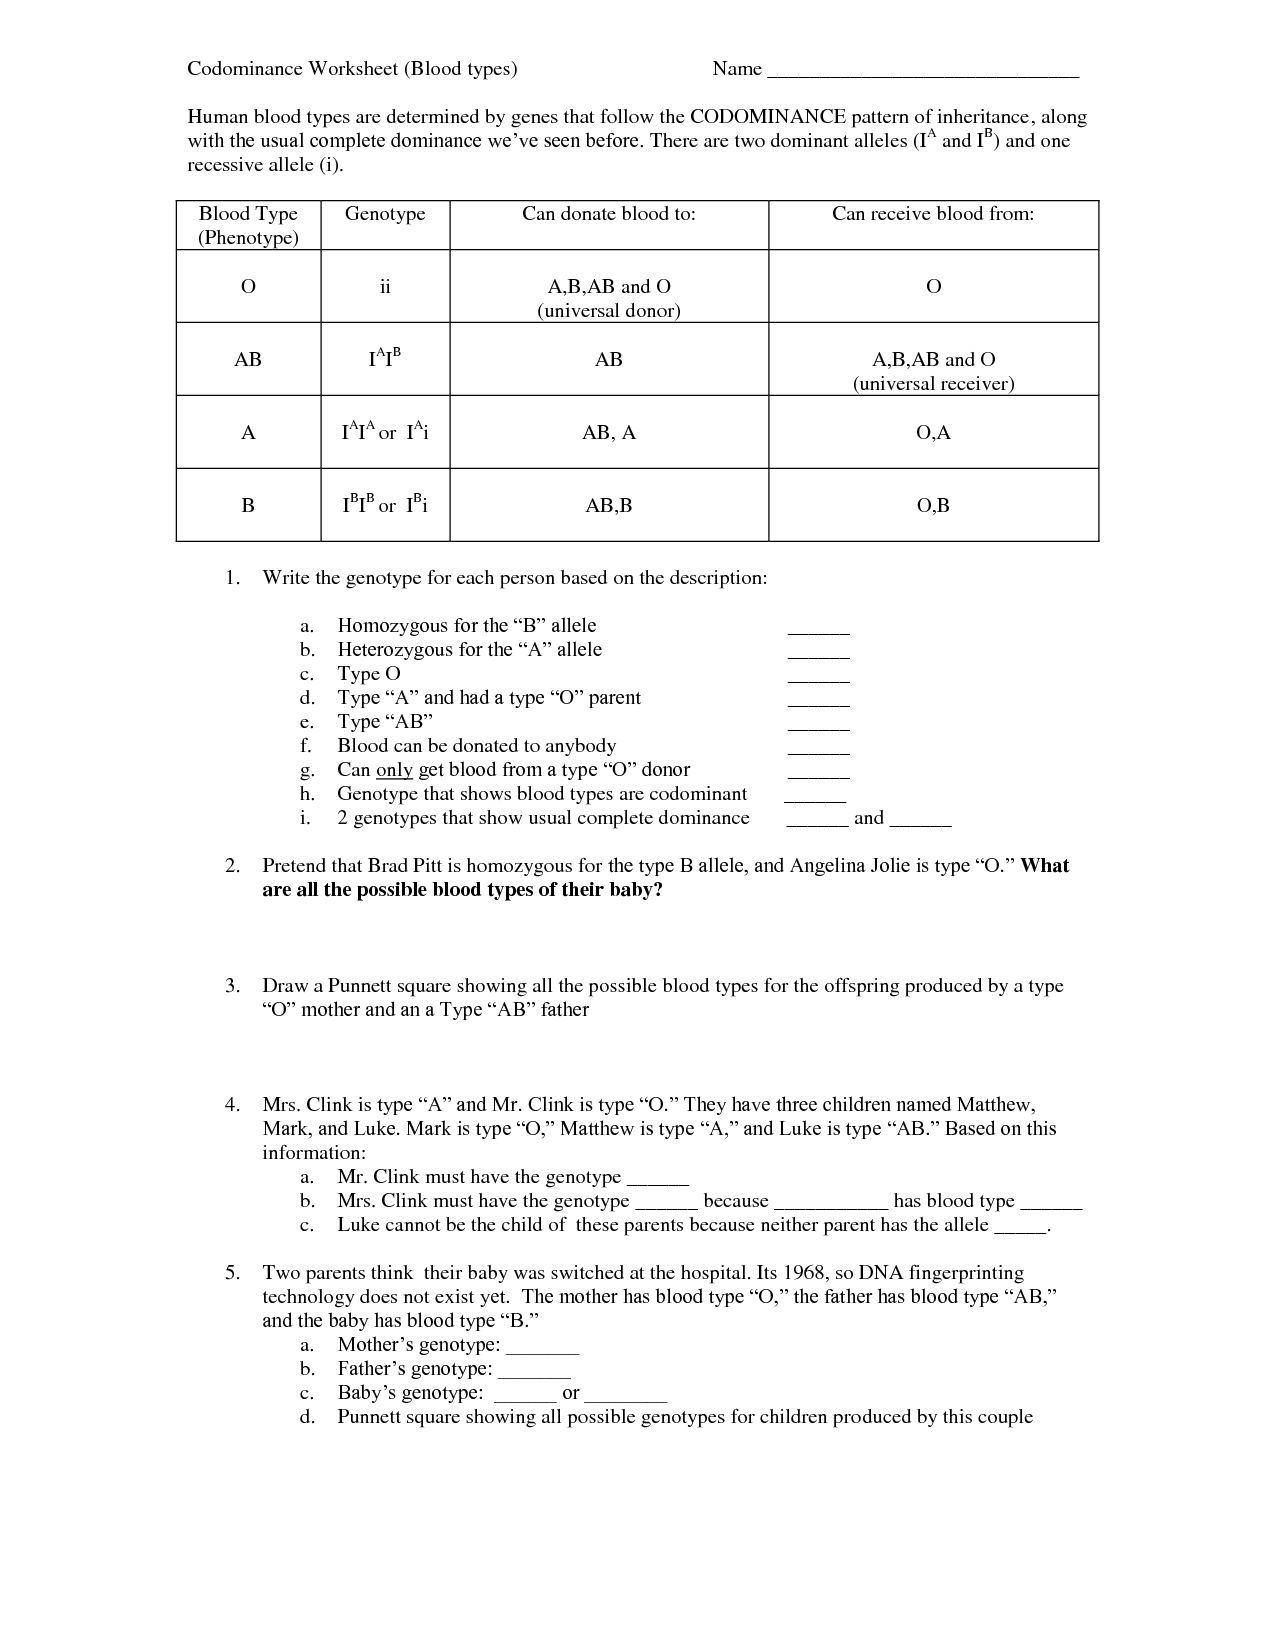 blood-typing-practice-worksheet-answers-sustainablened